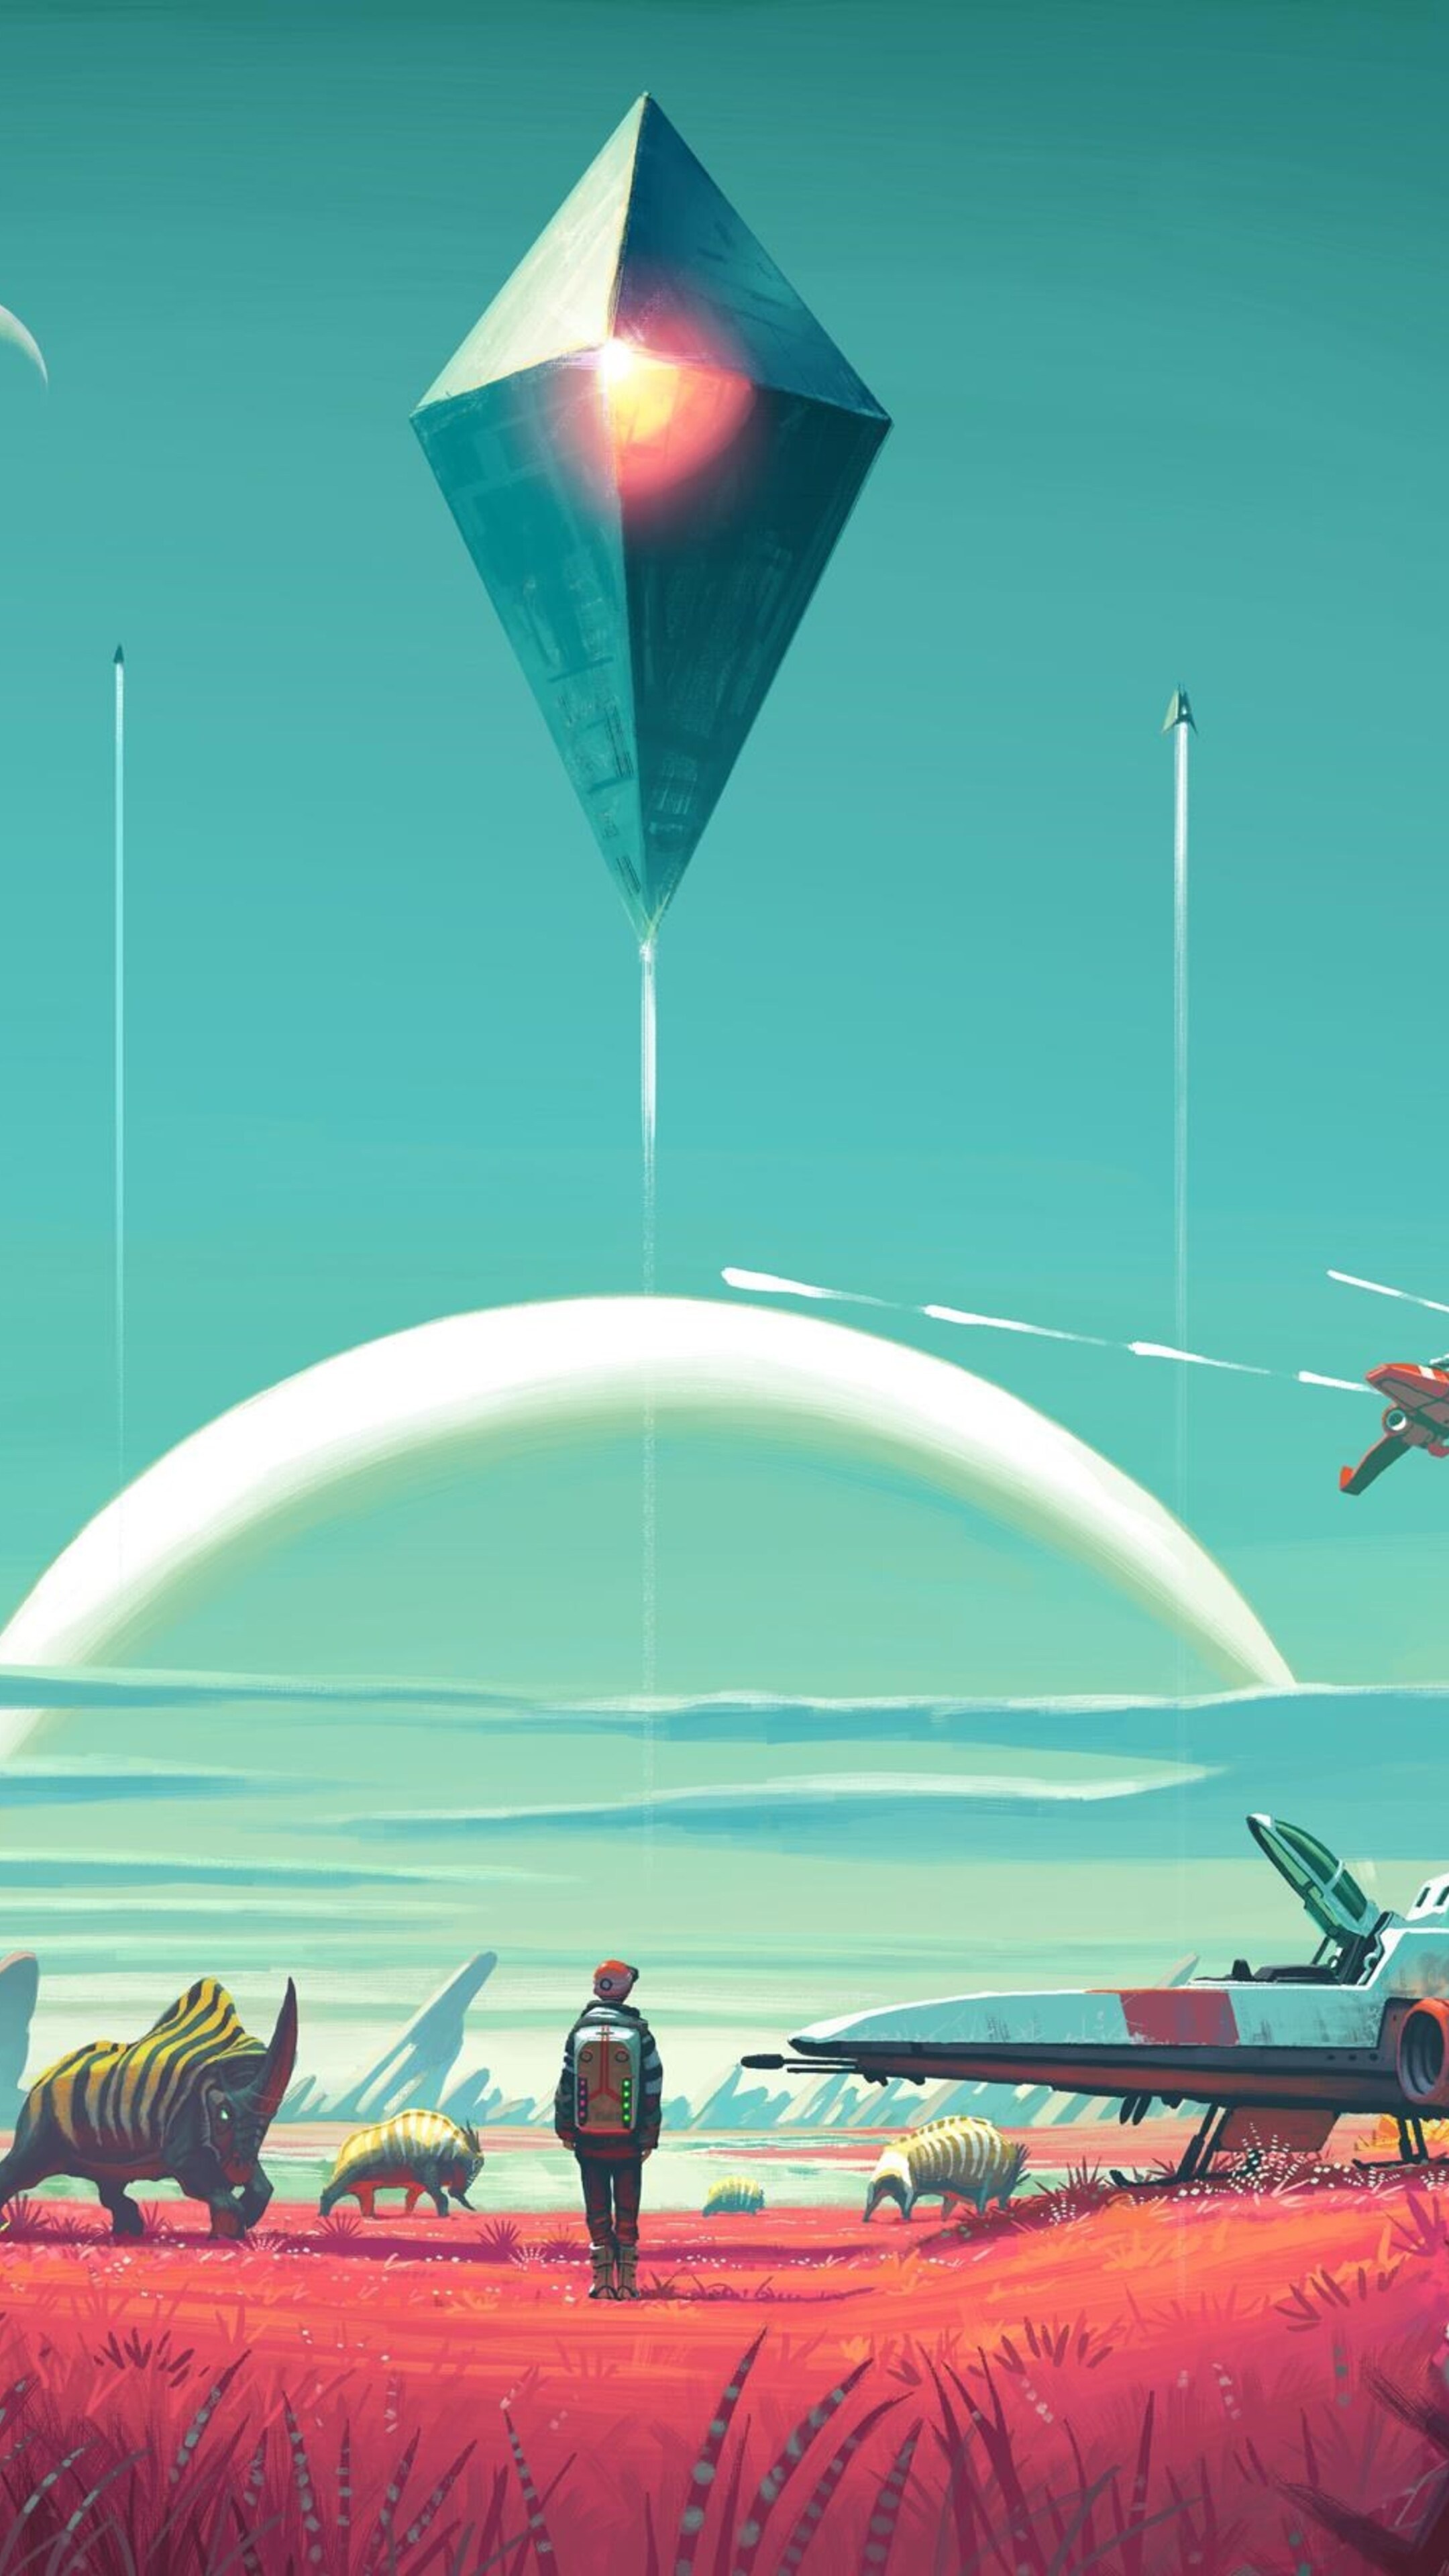 No Man's Sky on Sony Xperia, HD gaming wallpapers, Game on mobile, Premium resolution, 2160x3840 4K Phone